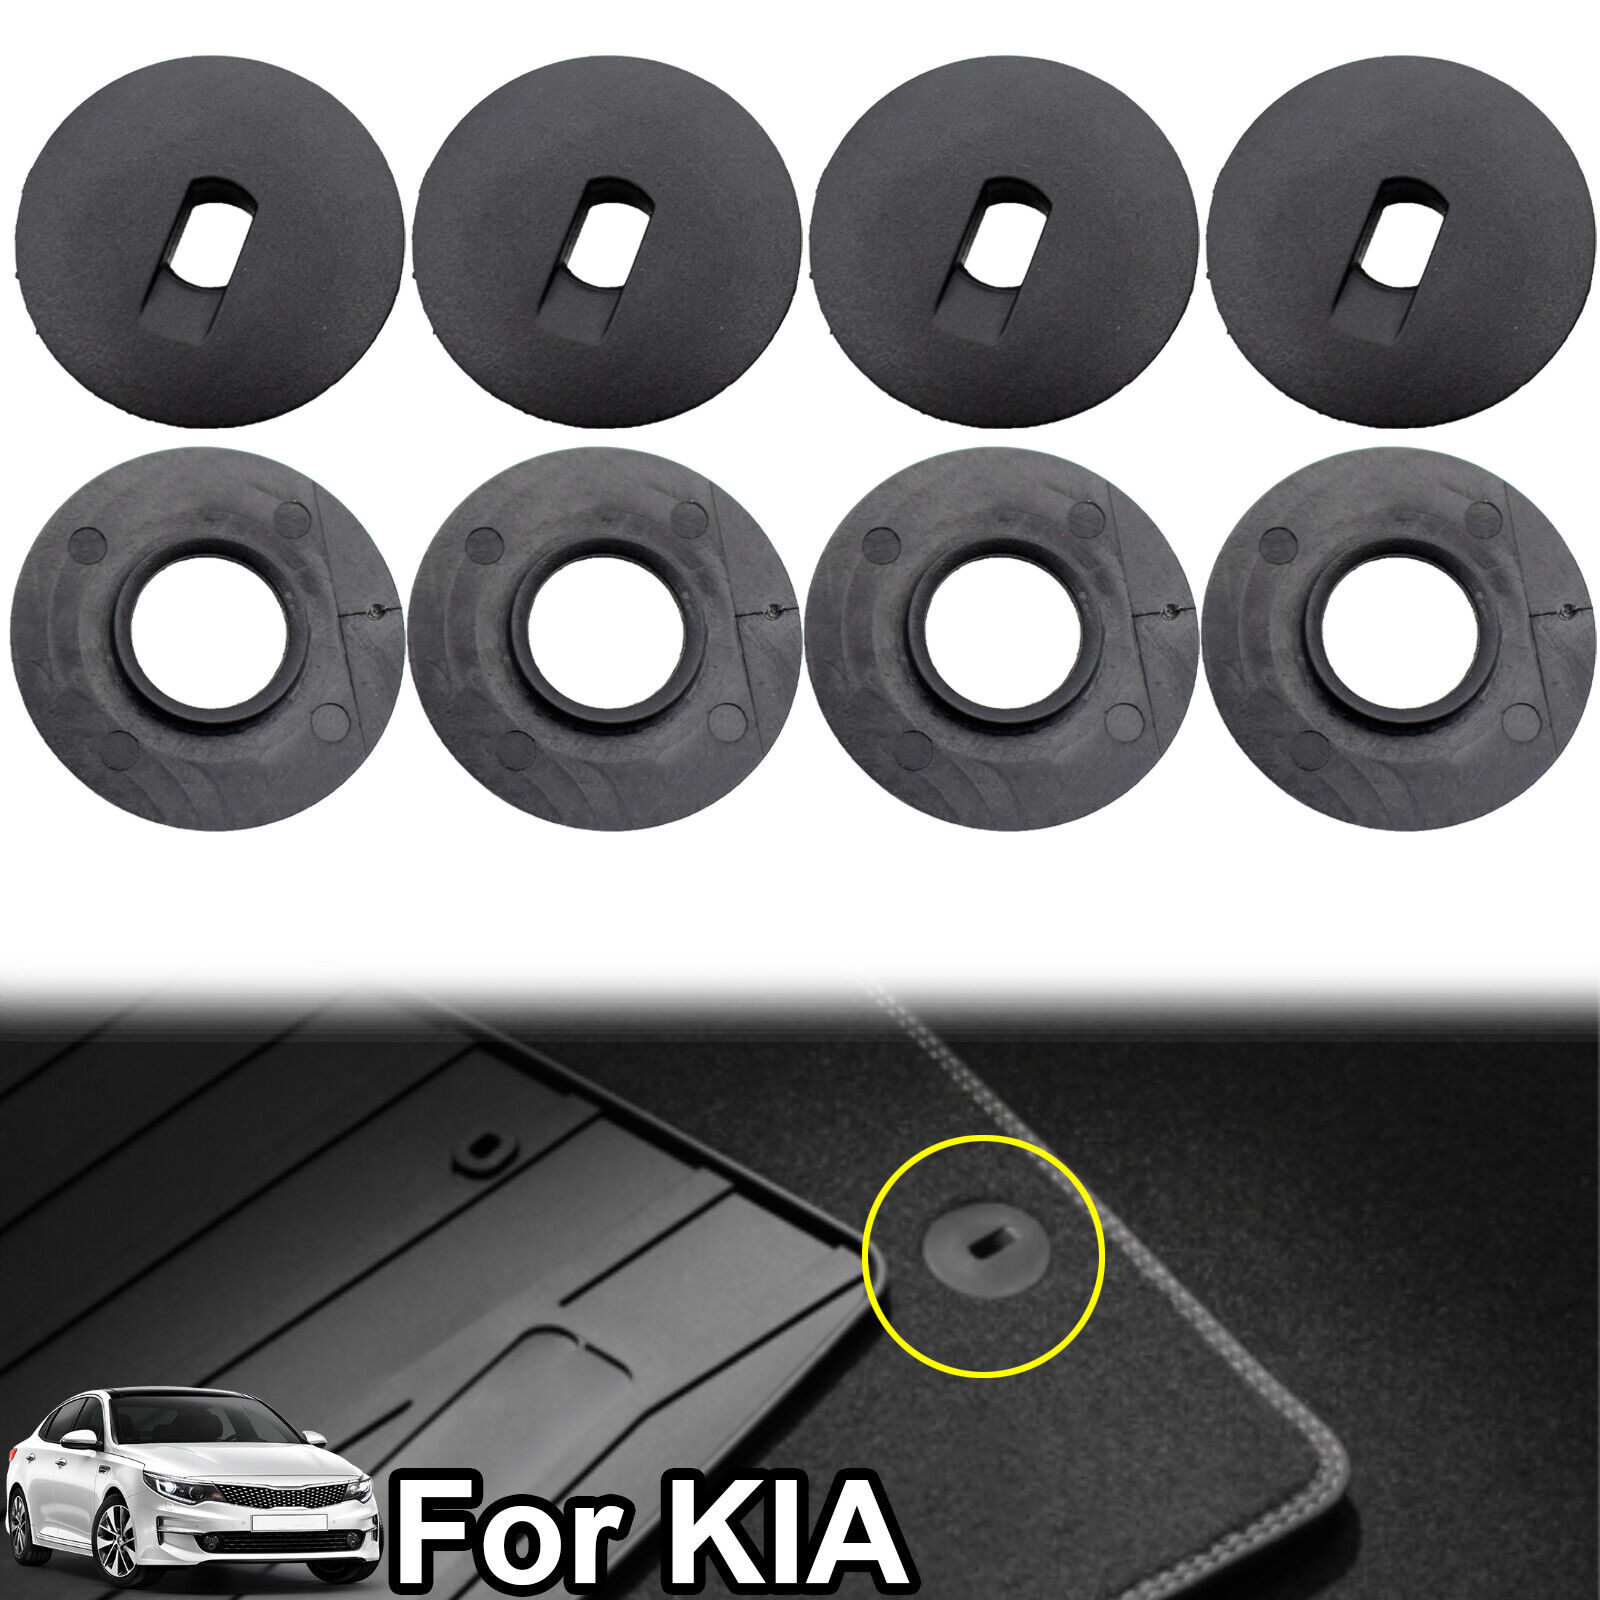 Irregularities possibility simple 4x Car Floor Mat Clips Carpet Fixing Retainer Clamp Holders For Kia Soul  Rio | eBay